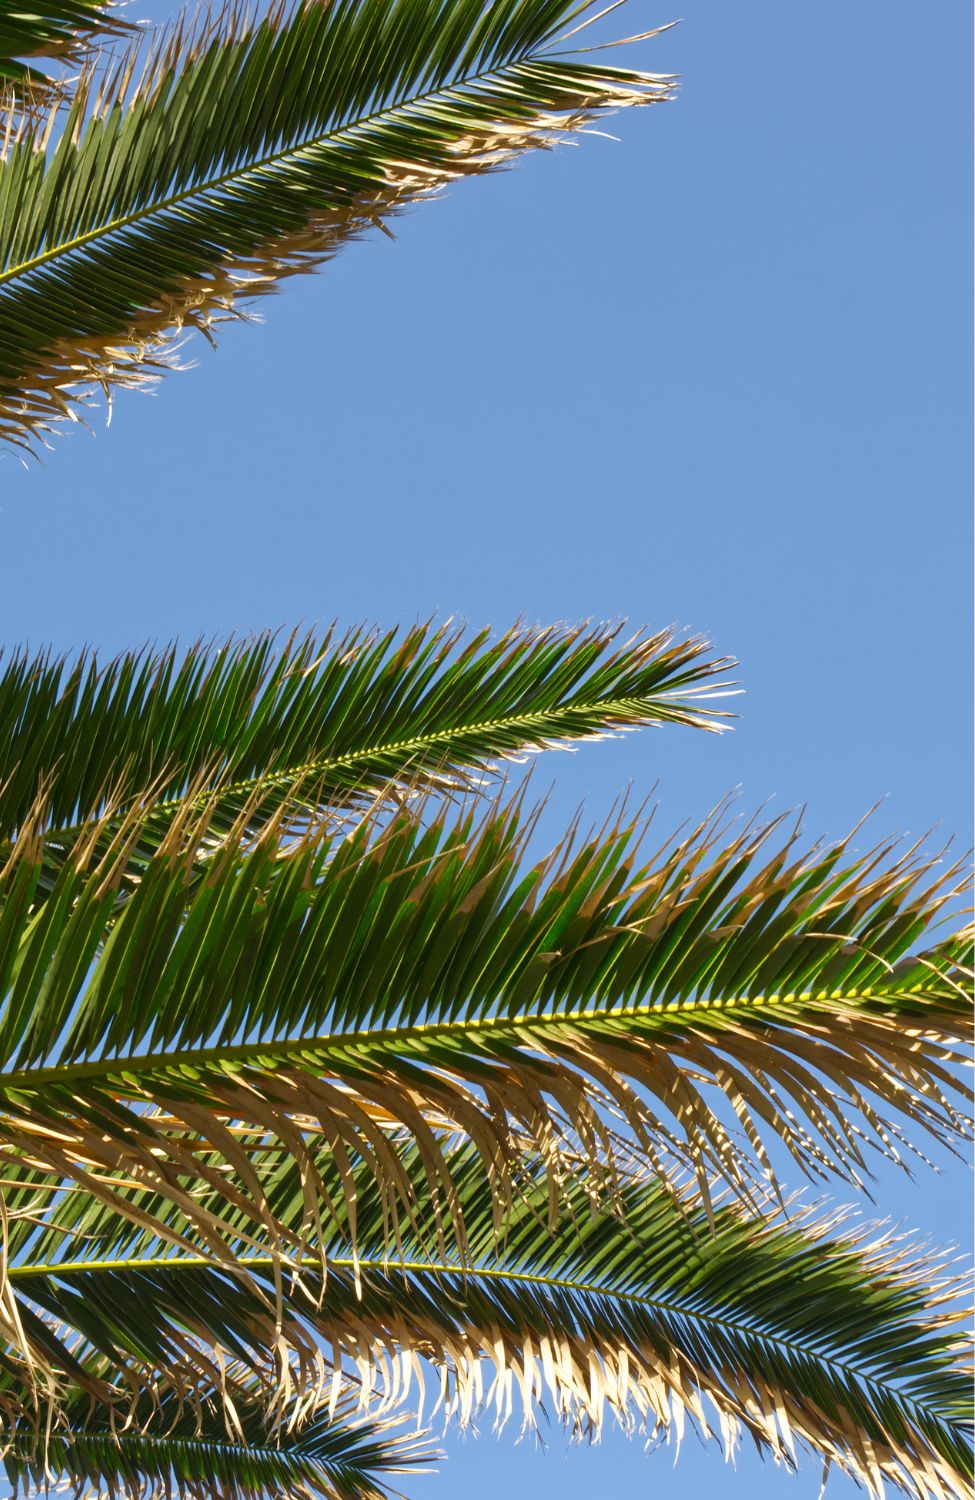 High-quality Phoenix canariensis seeds for sale - grow beautiful palm trees in your backyard. Order now for fast shipping and excellent customer service!